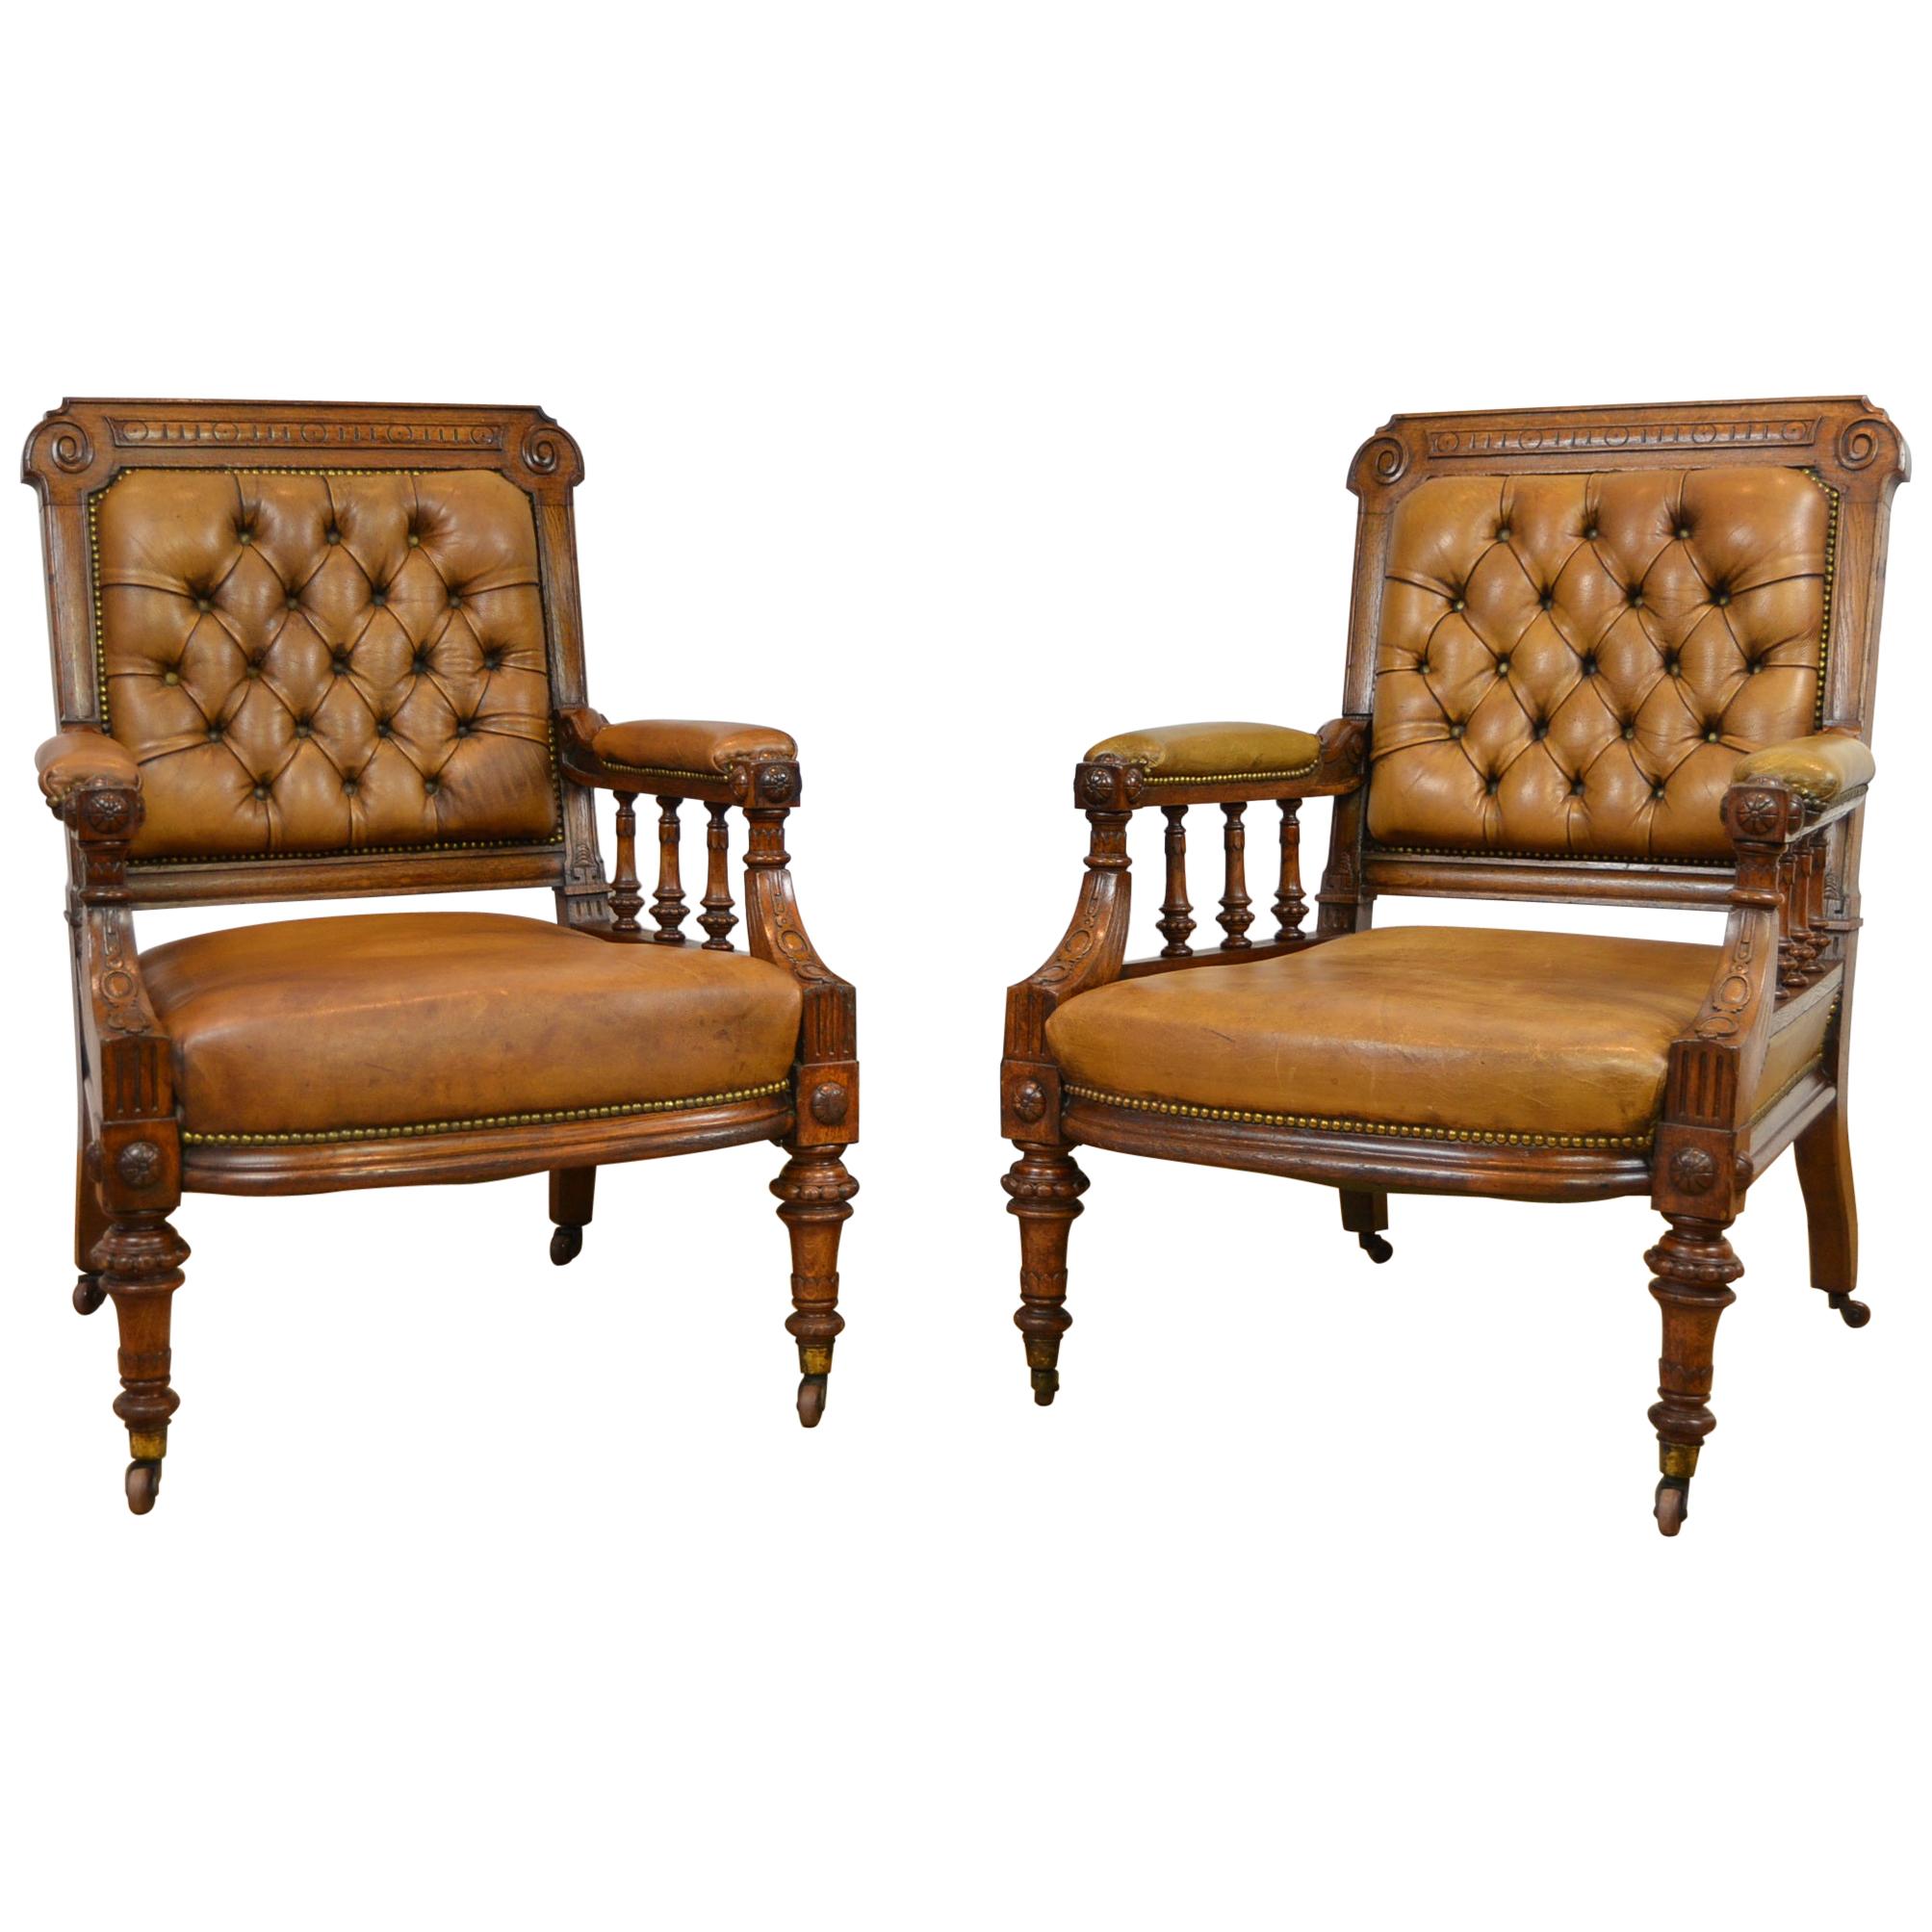 Two Leather Library Chairs, Leather Armchairs, Late 19th Century